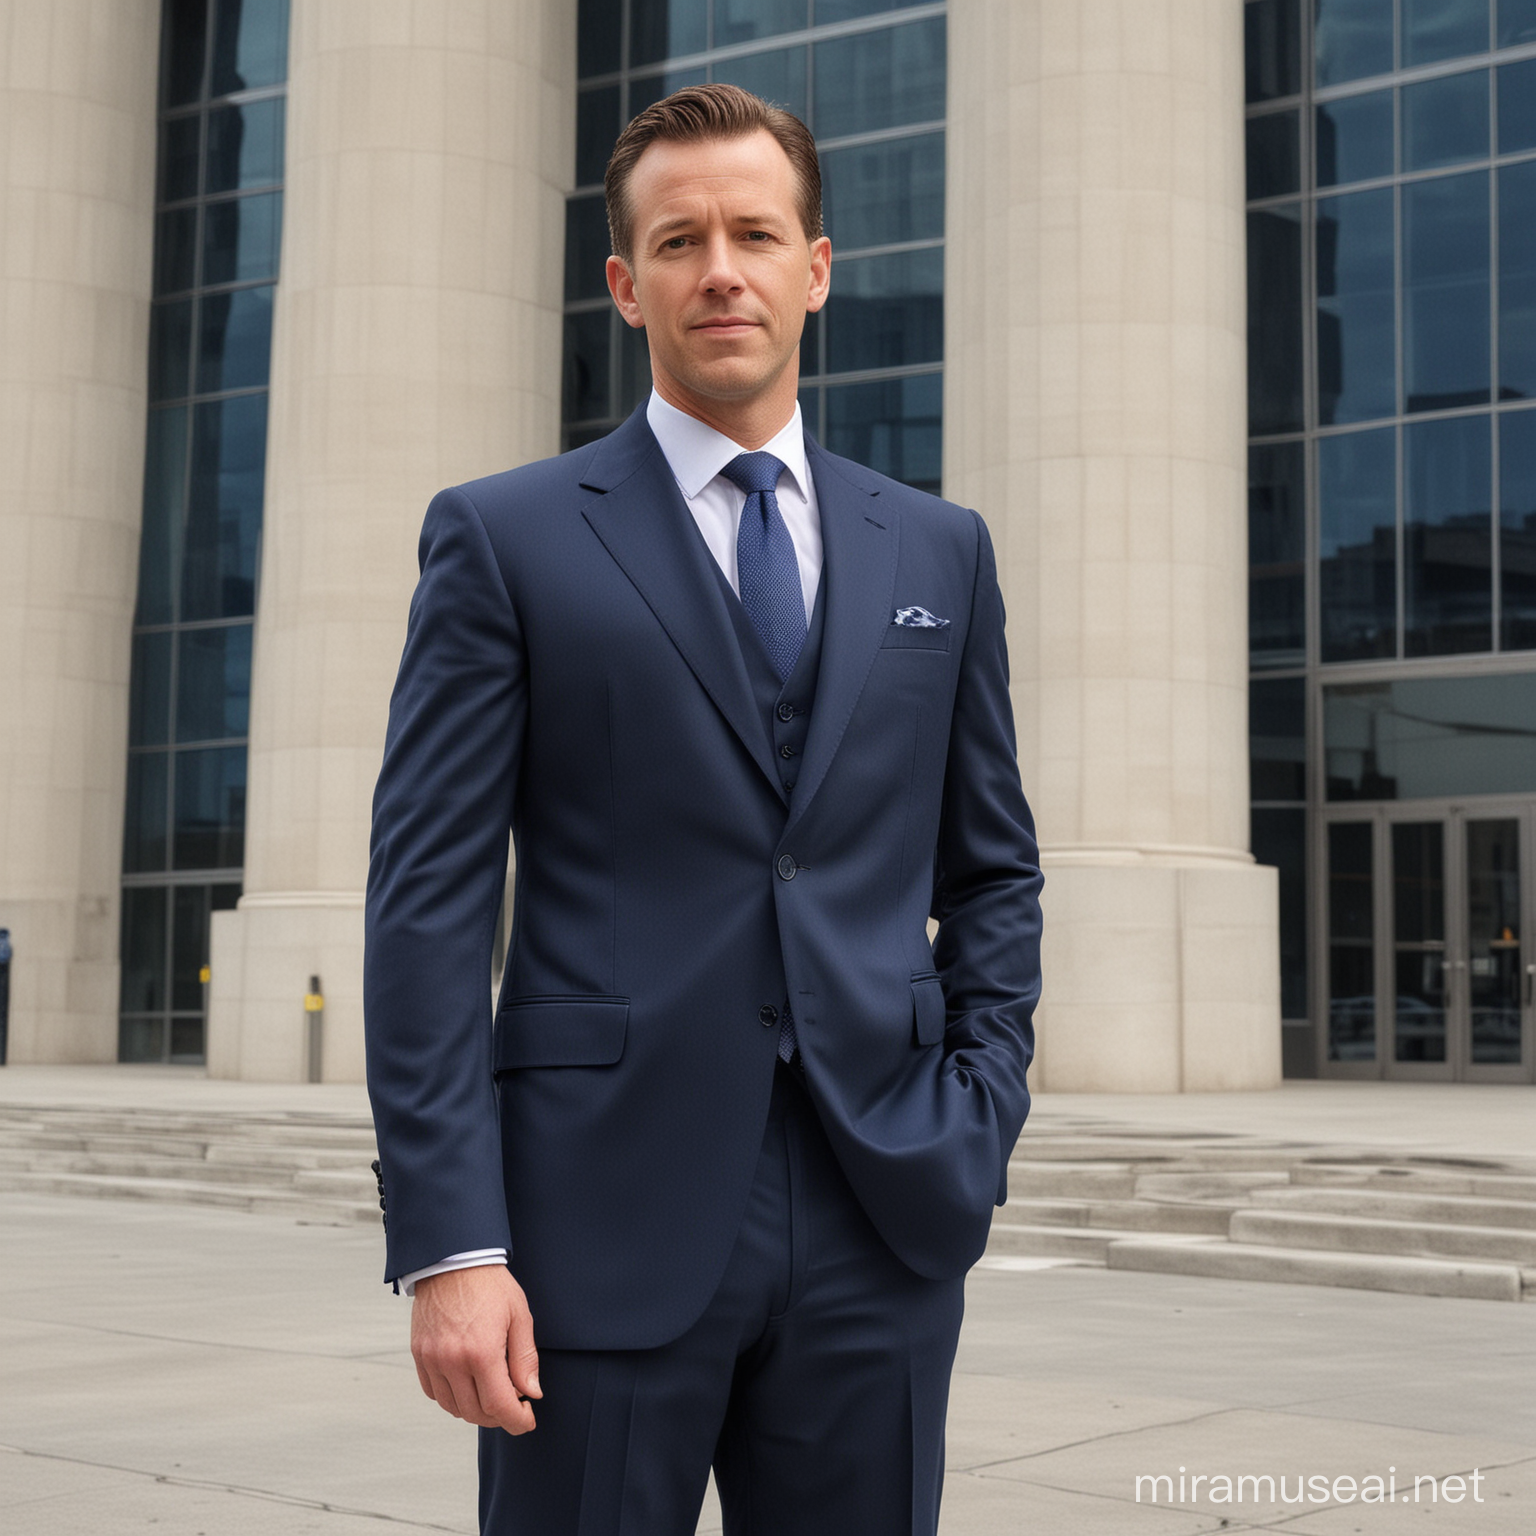 photo of a white male age 47 that is wearing a navy blue suit and standing in front of a large building



